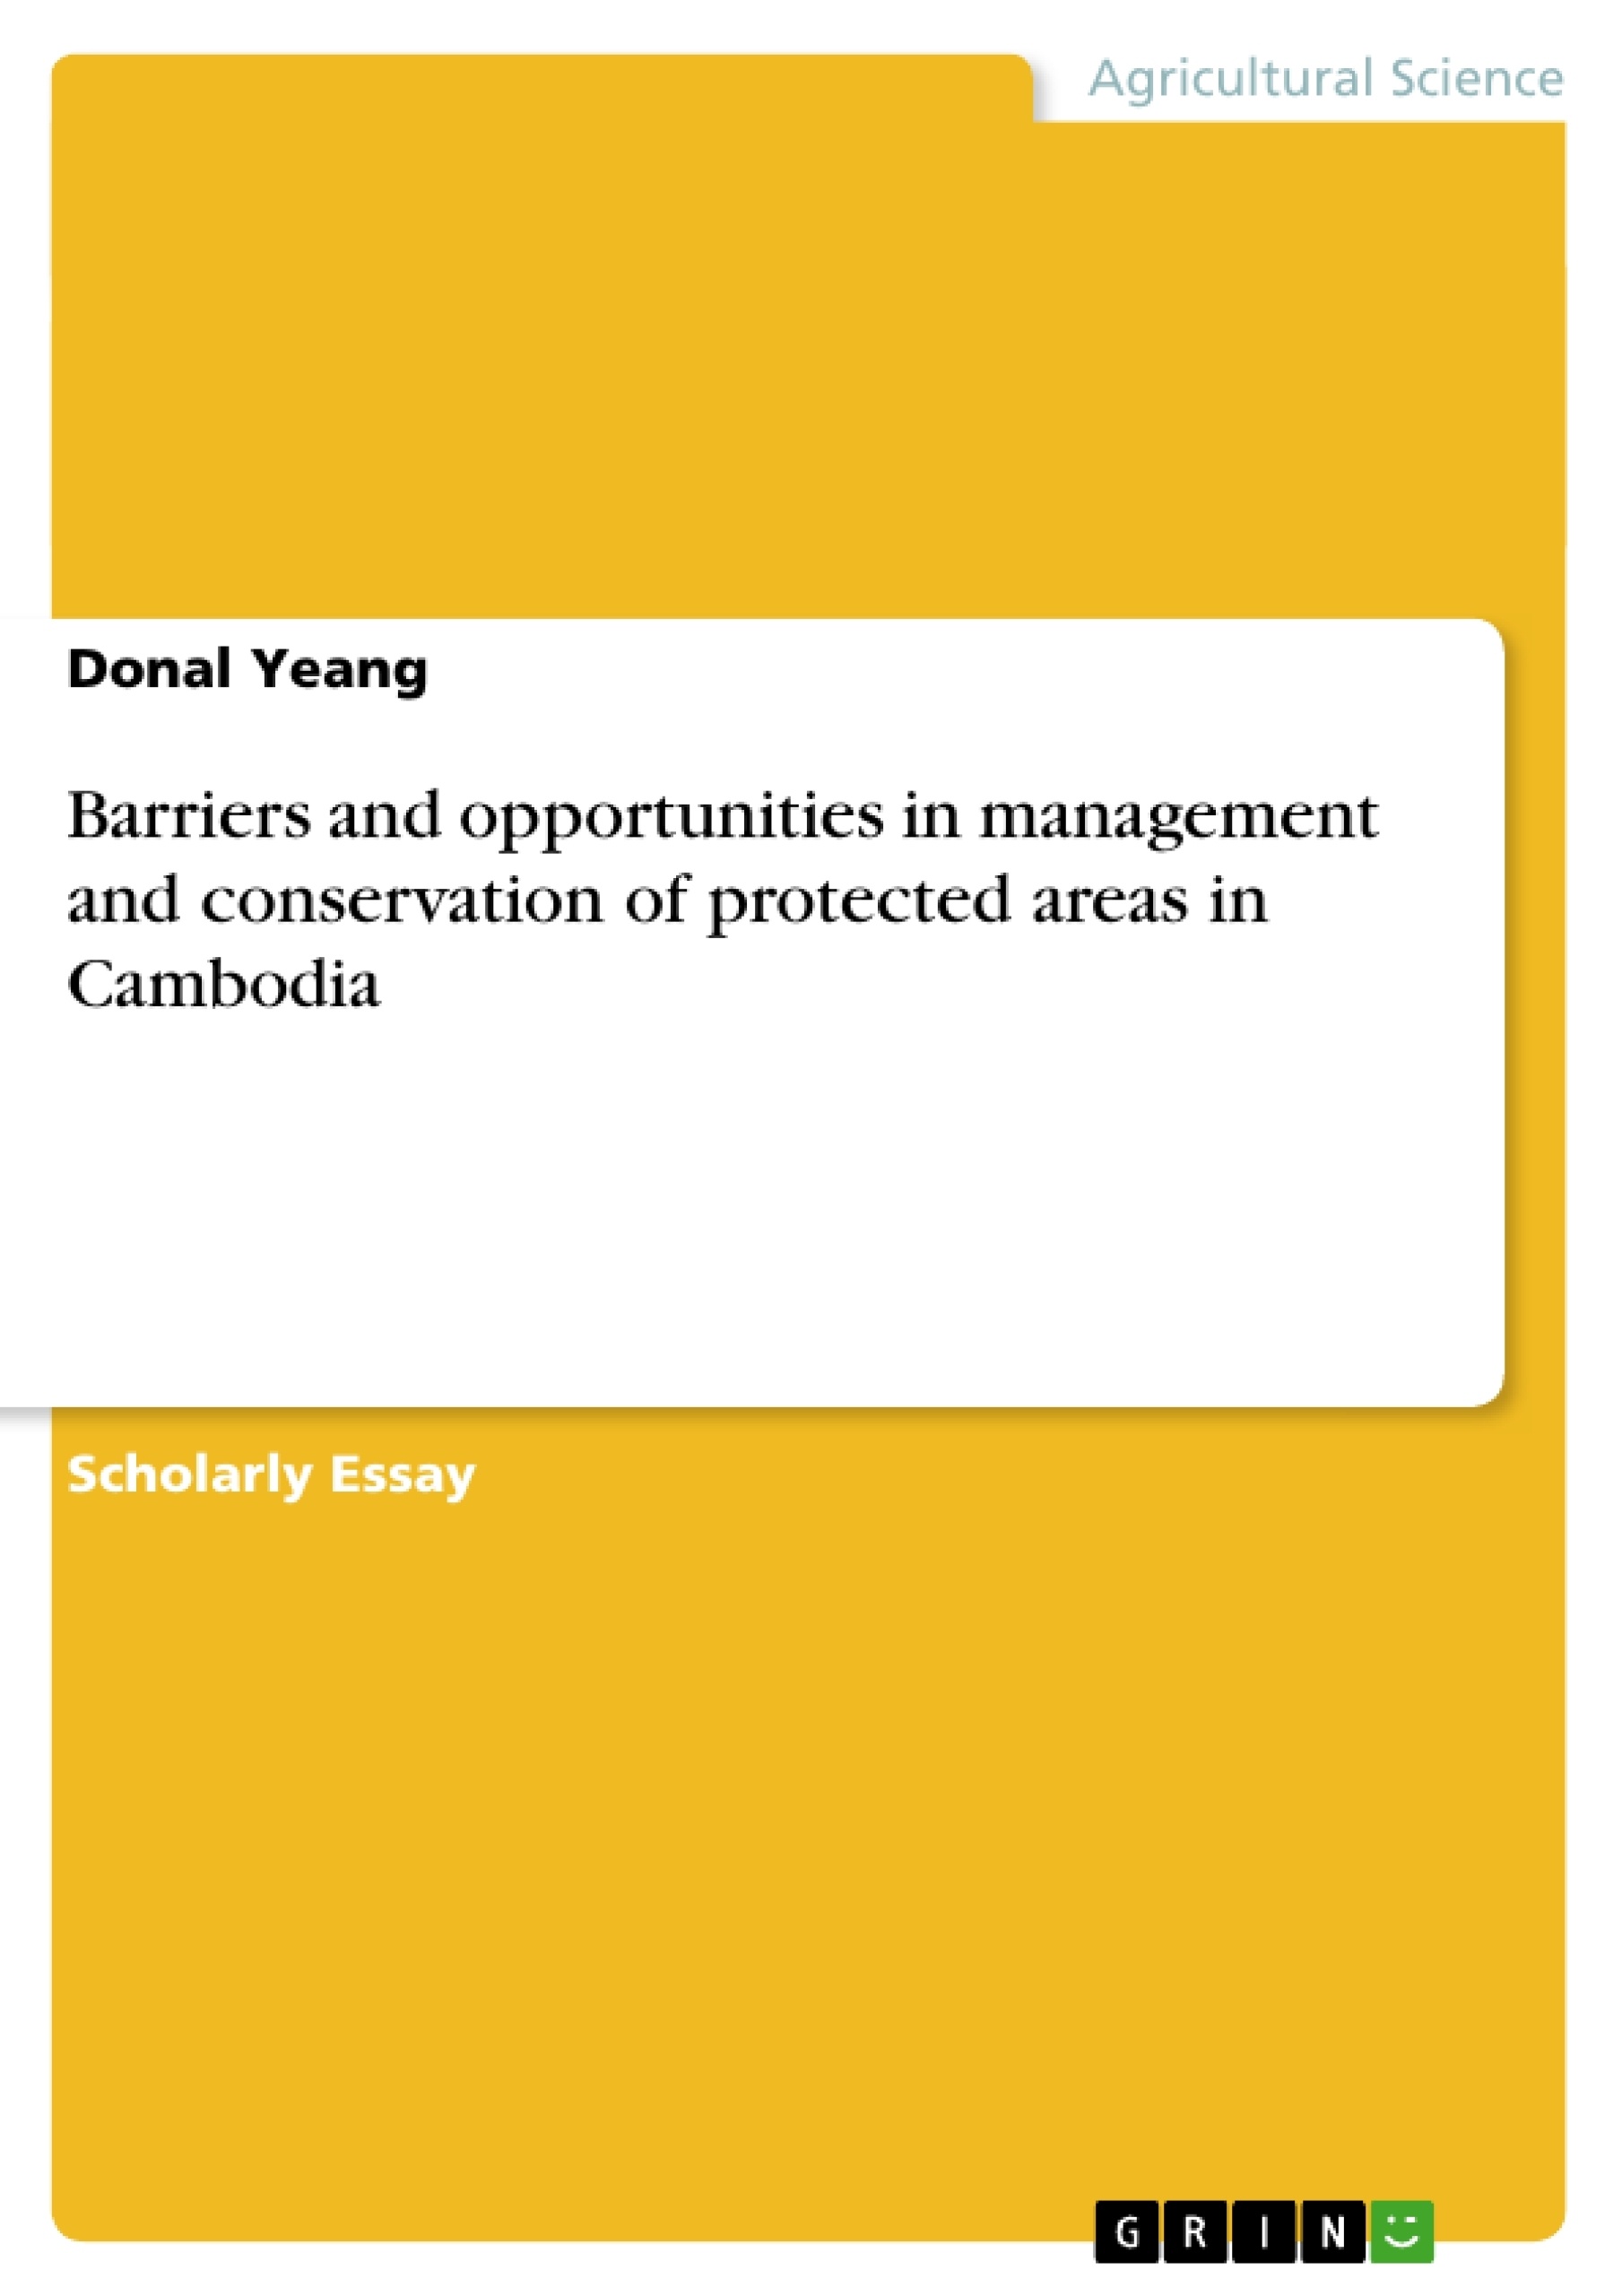 Titre: Barriers and opportunities in management and conservation of protected areas in Cambodia